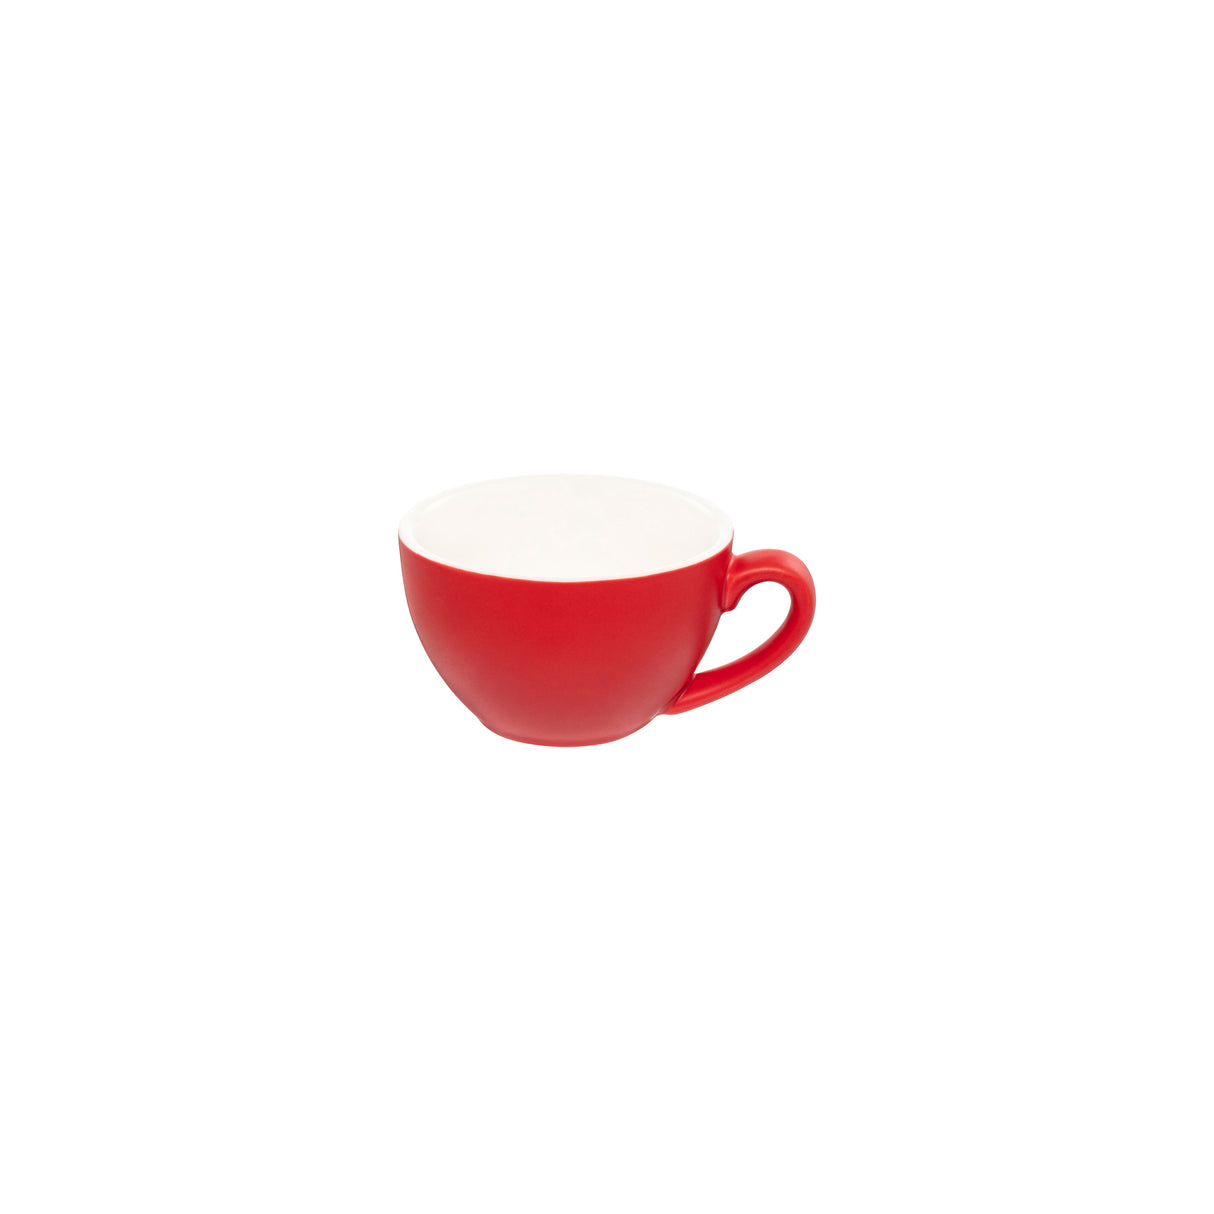 Cappuccino Cup - Rosso, 200ml, Intorno: Pack of 6